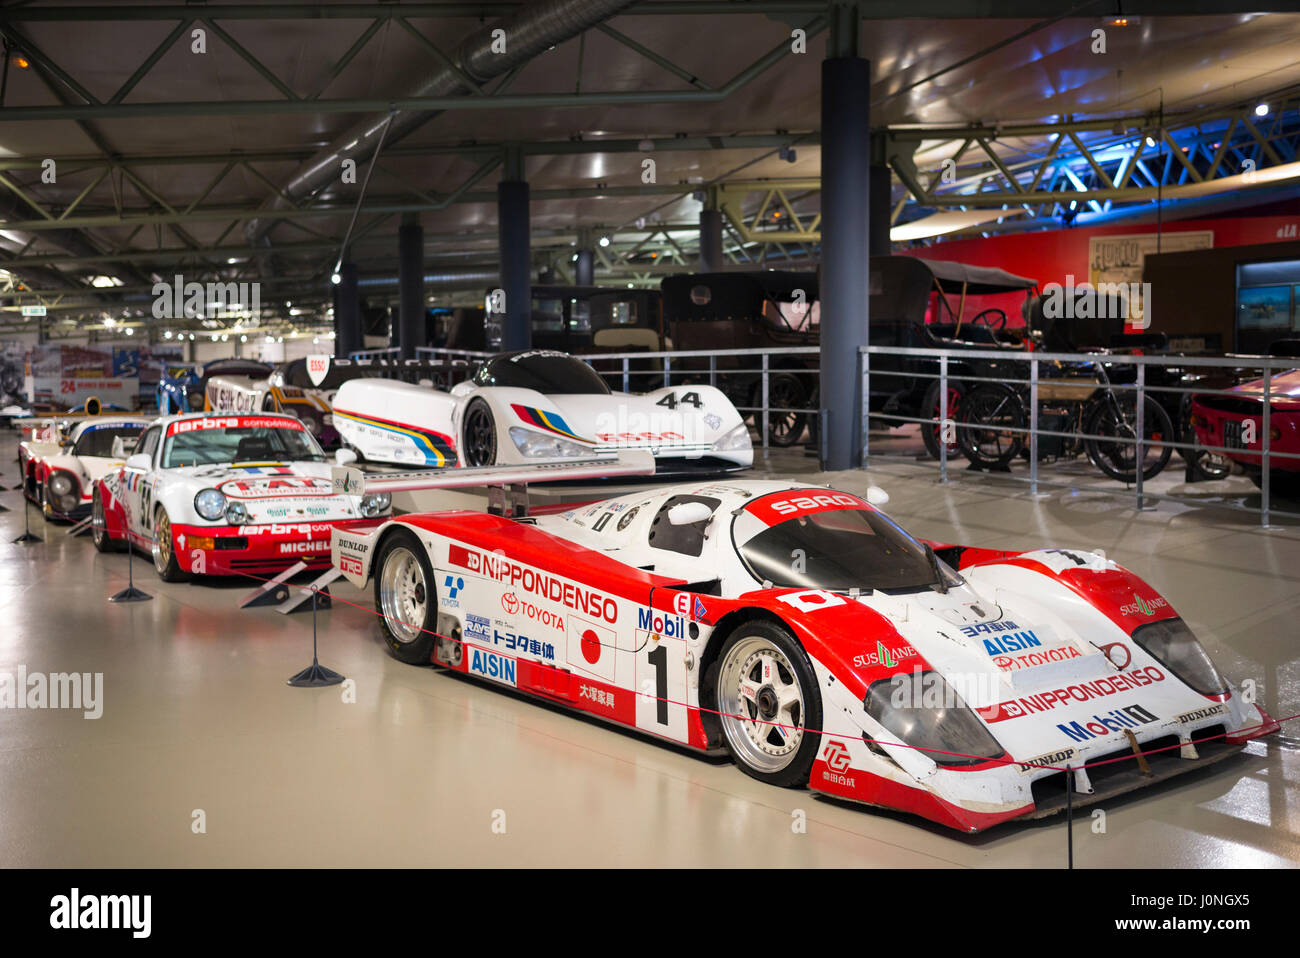 Champion race cars at the exhibition musee at Le Mans Racetrack, France Stock Photo